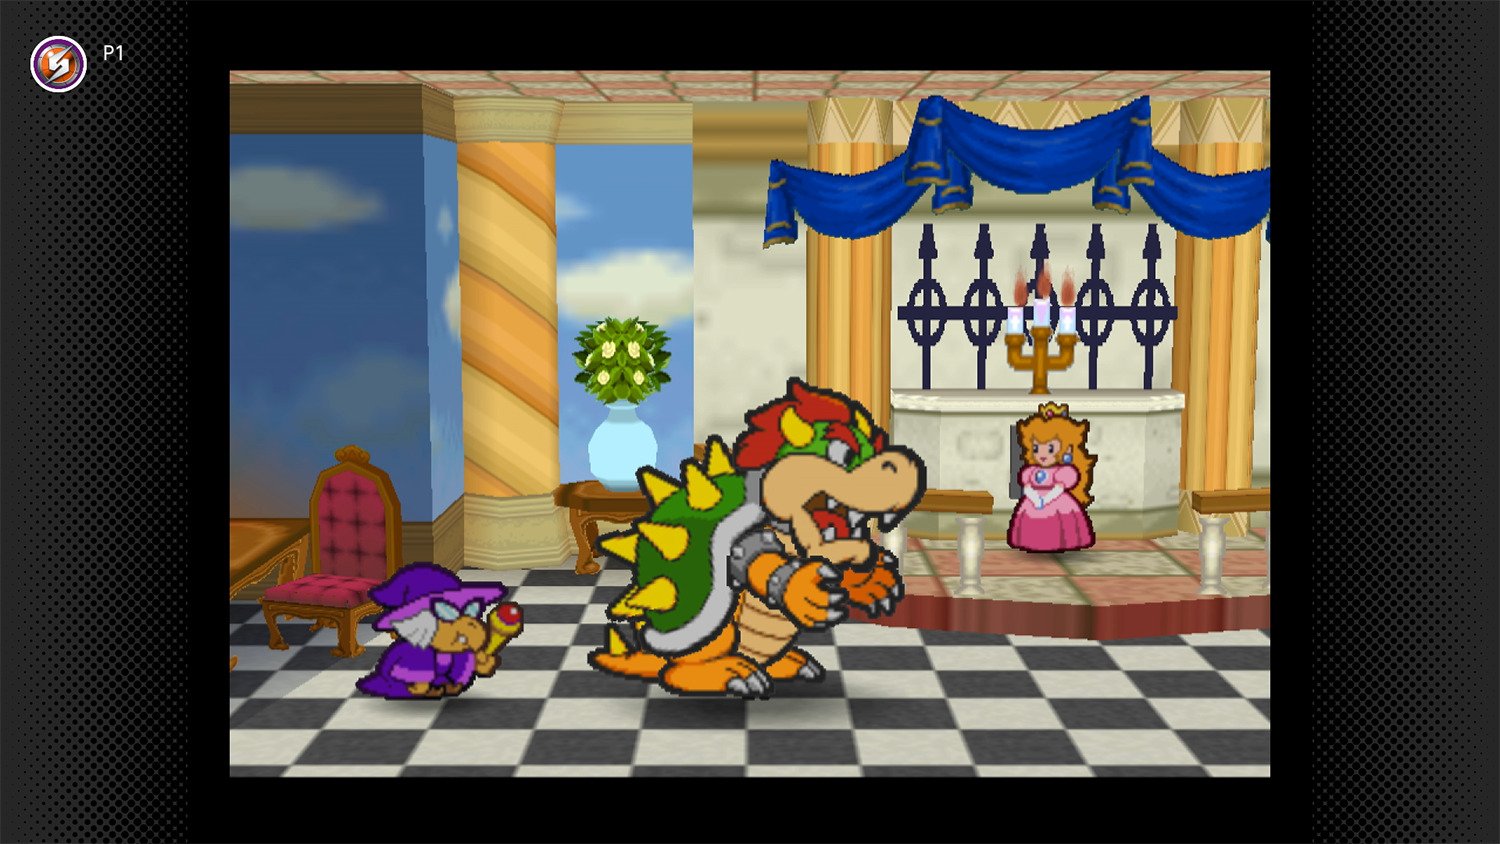 Kamek, Bowser, and Princess Peach in Paper Mario Nintendo 64, now available via Switch Online